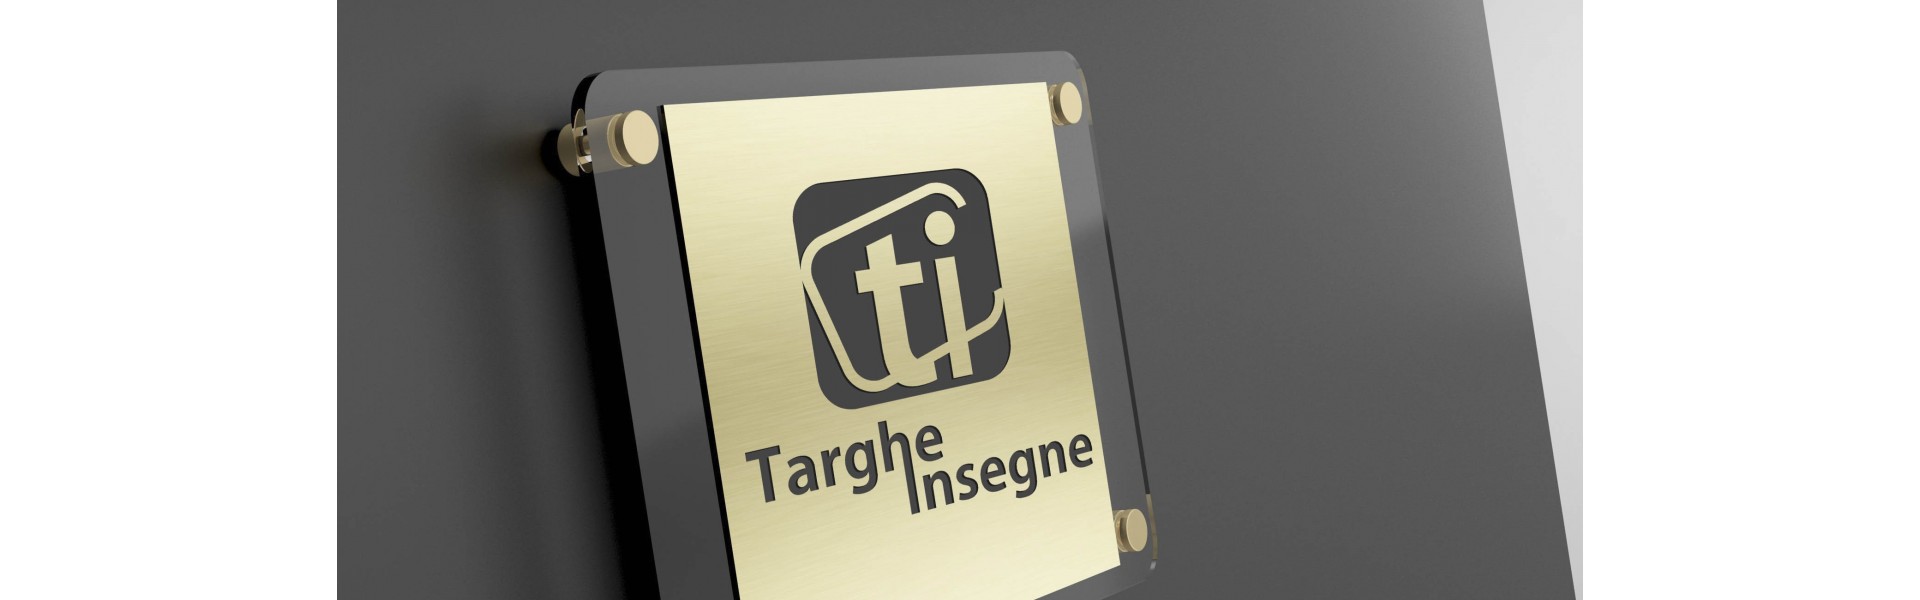 Targhe professionali in ABS incise